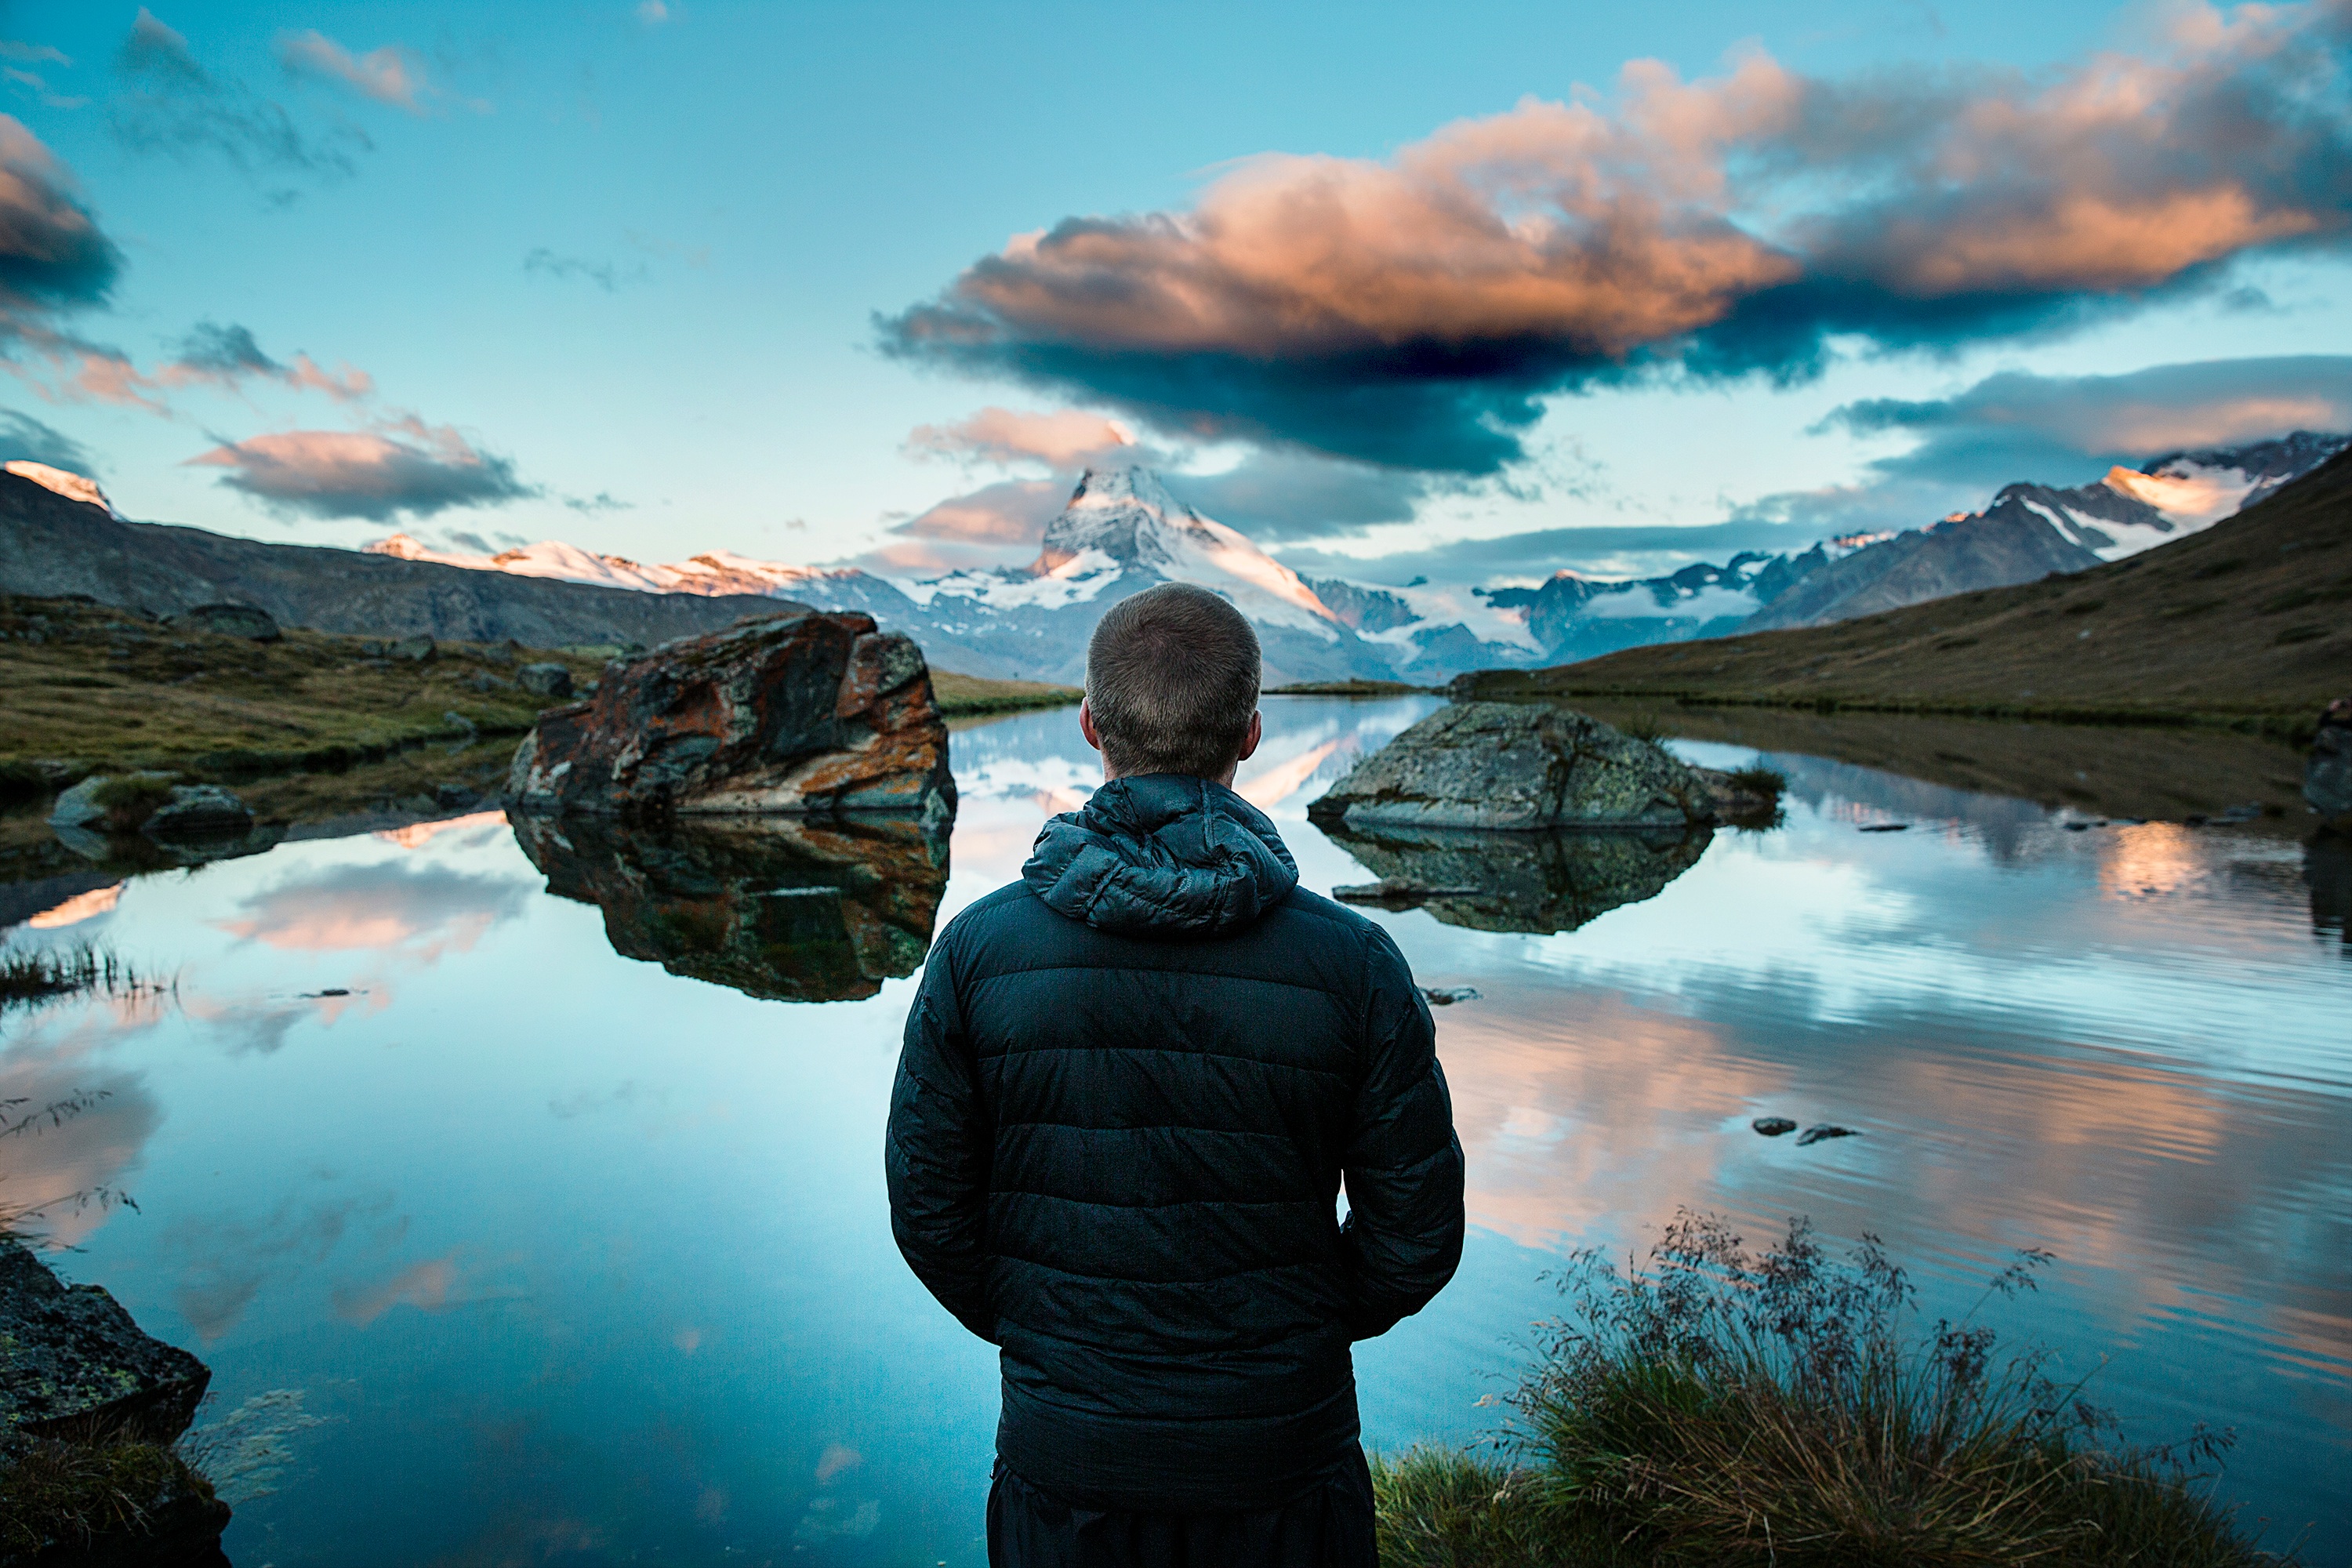 A man stands by a lake in the mountains and looks out into the distance